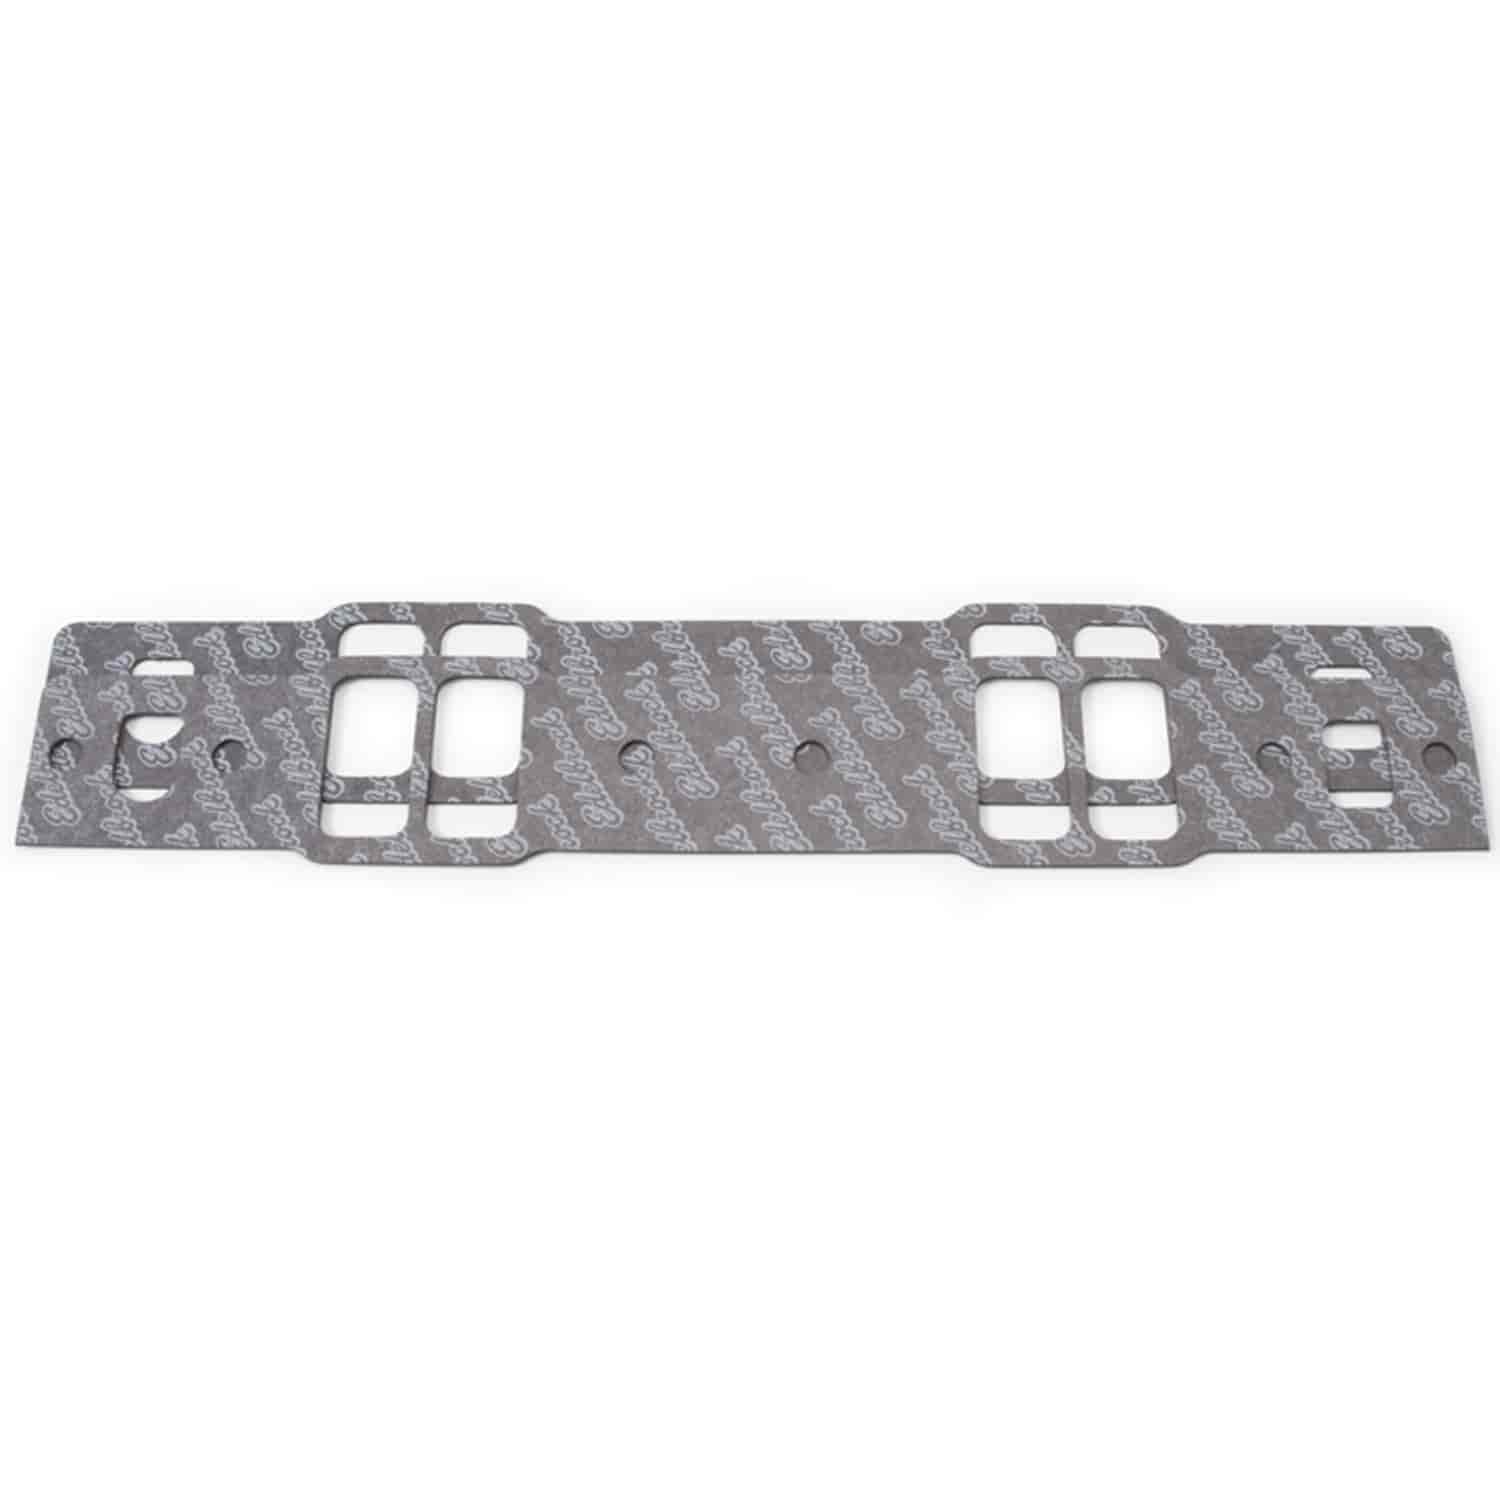 Intake Gaskets for Small Block Chevy Vortec Bowtie